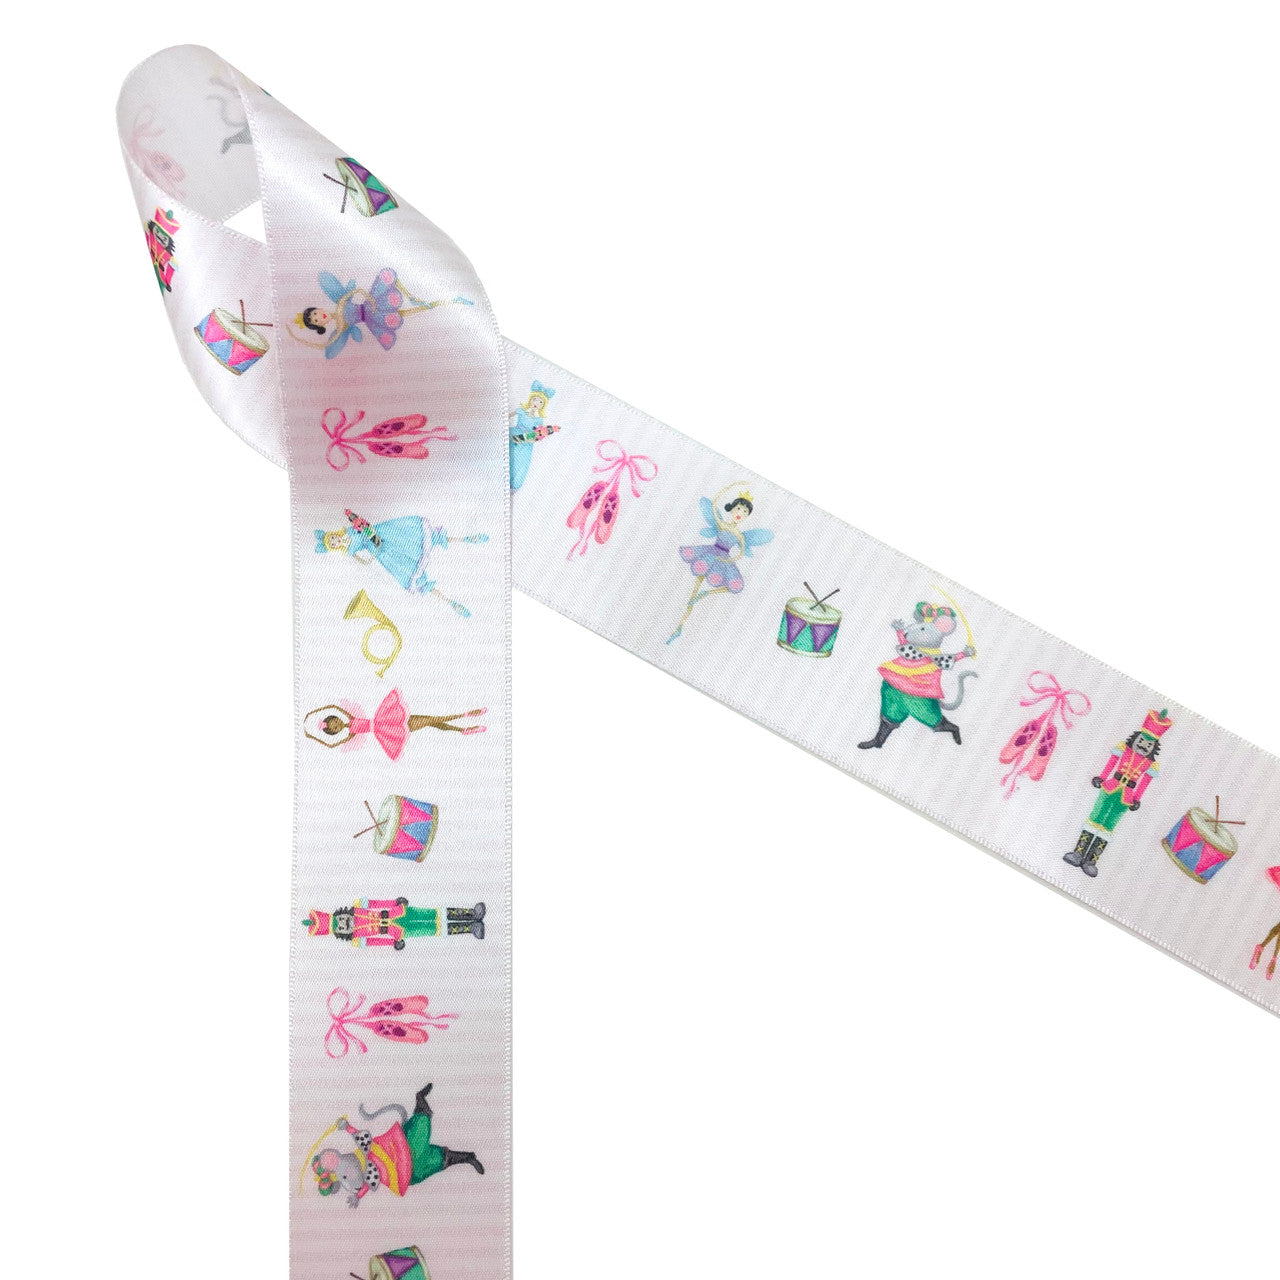 Nutcracker suite ribbon featuring all the characters in the ballet printed on 1/5" white single face satin. This ribbon is ideal for ballet schools, ballerinas, gift wrap, gift baskets, holiday crafts, sewing projects, and quilting. Be sure to have this ribbon on hand for all your Holiday events!  All our ribbon is designed and printed in the USA